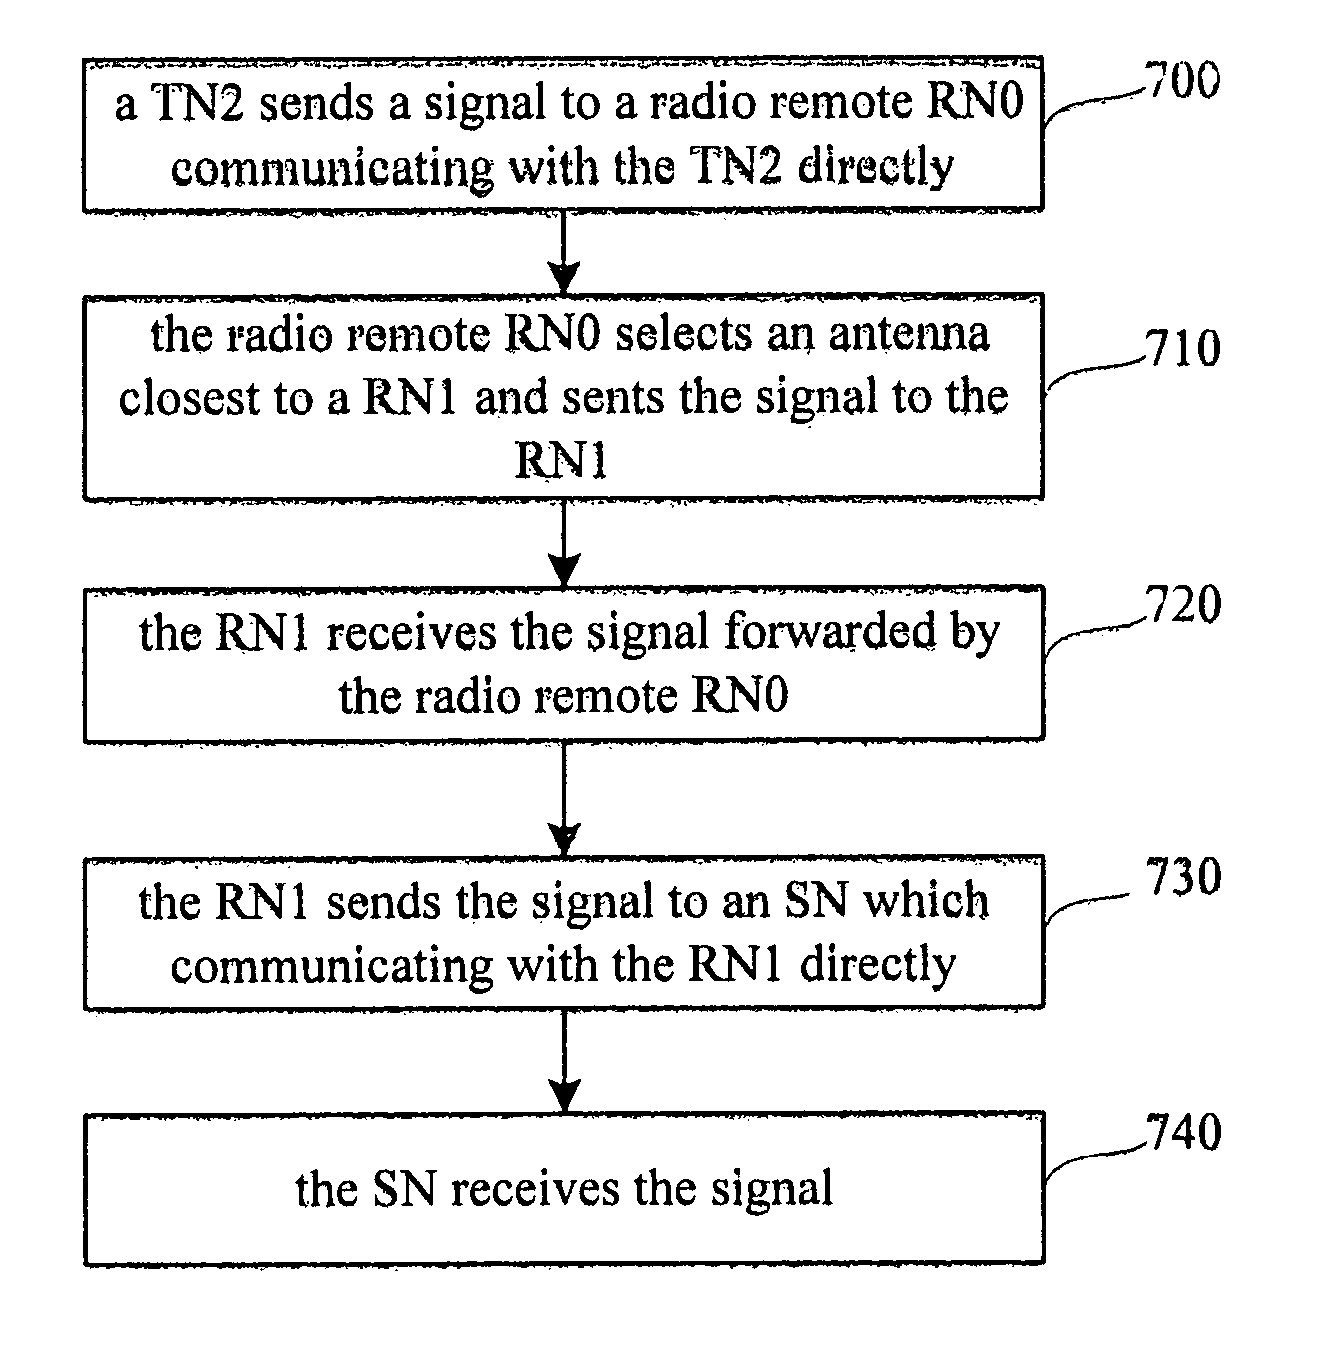 Method and apparatus for forwarding data in forwarding networks